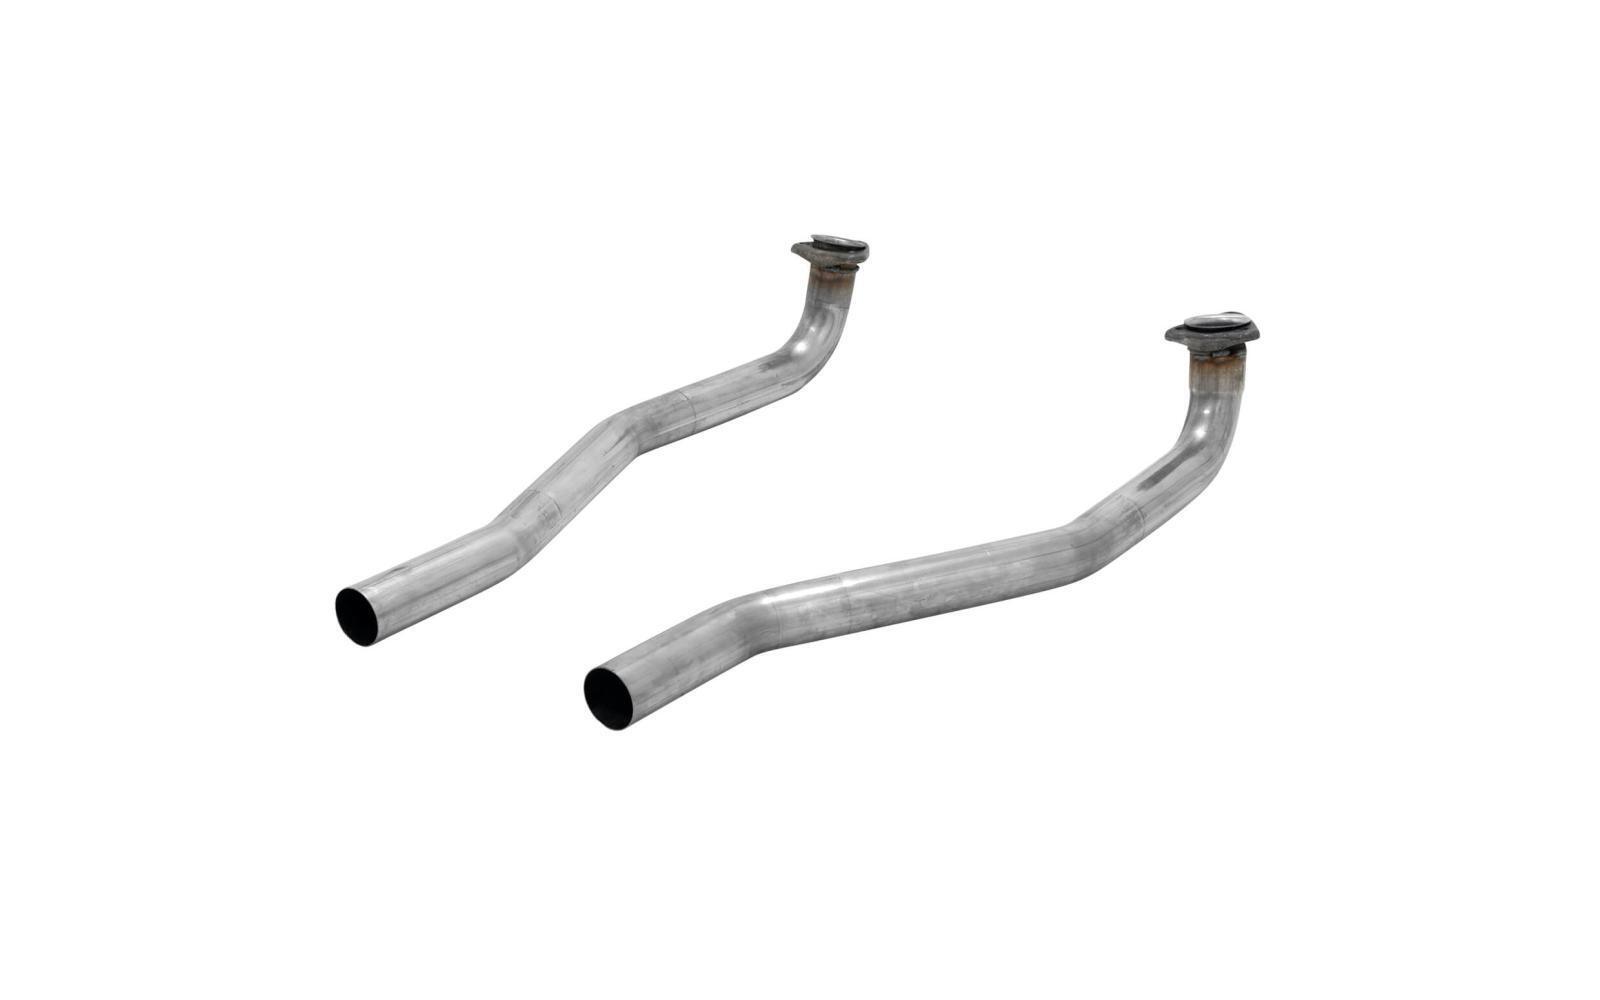 Flowmaster Manifold Downpipe Kit for 65-67 Bel Air Impala Caprice Biscayne Dual